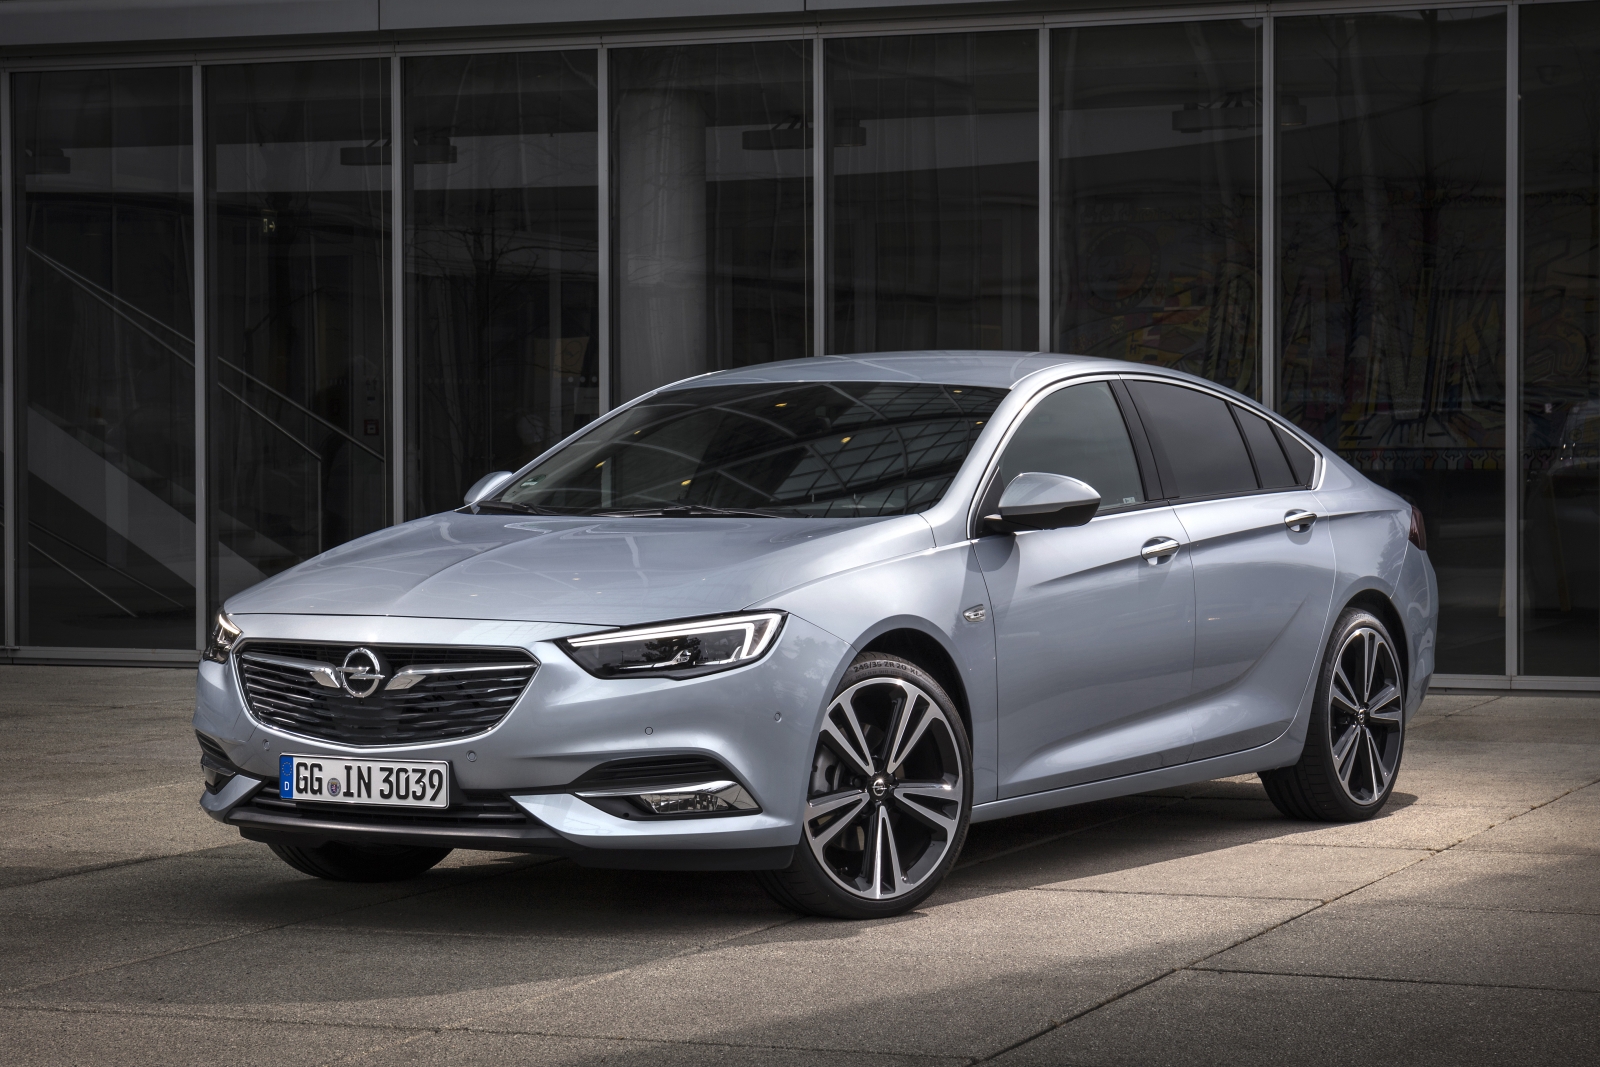 New top-of-the-line engine for Opel Insignia